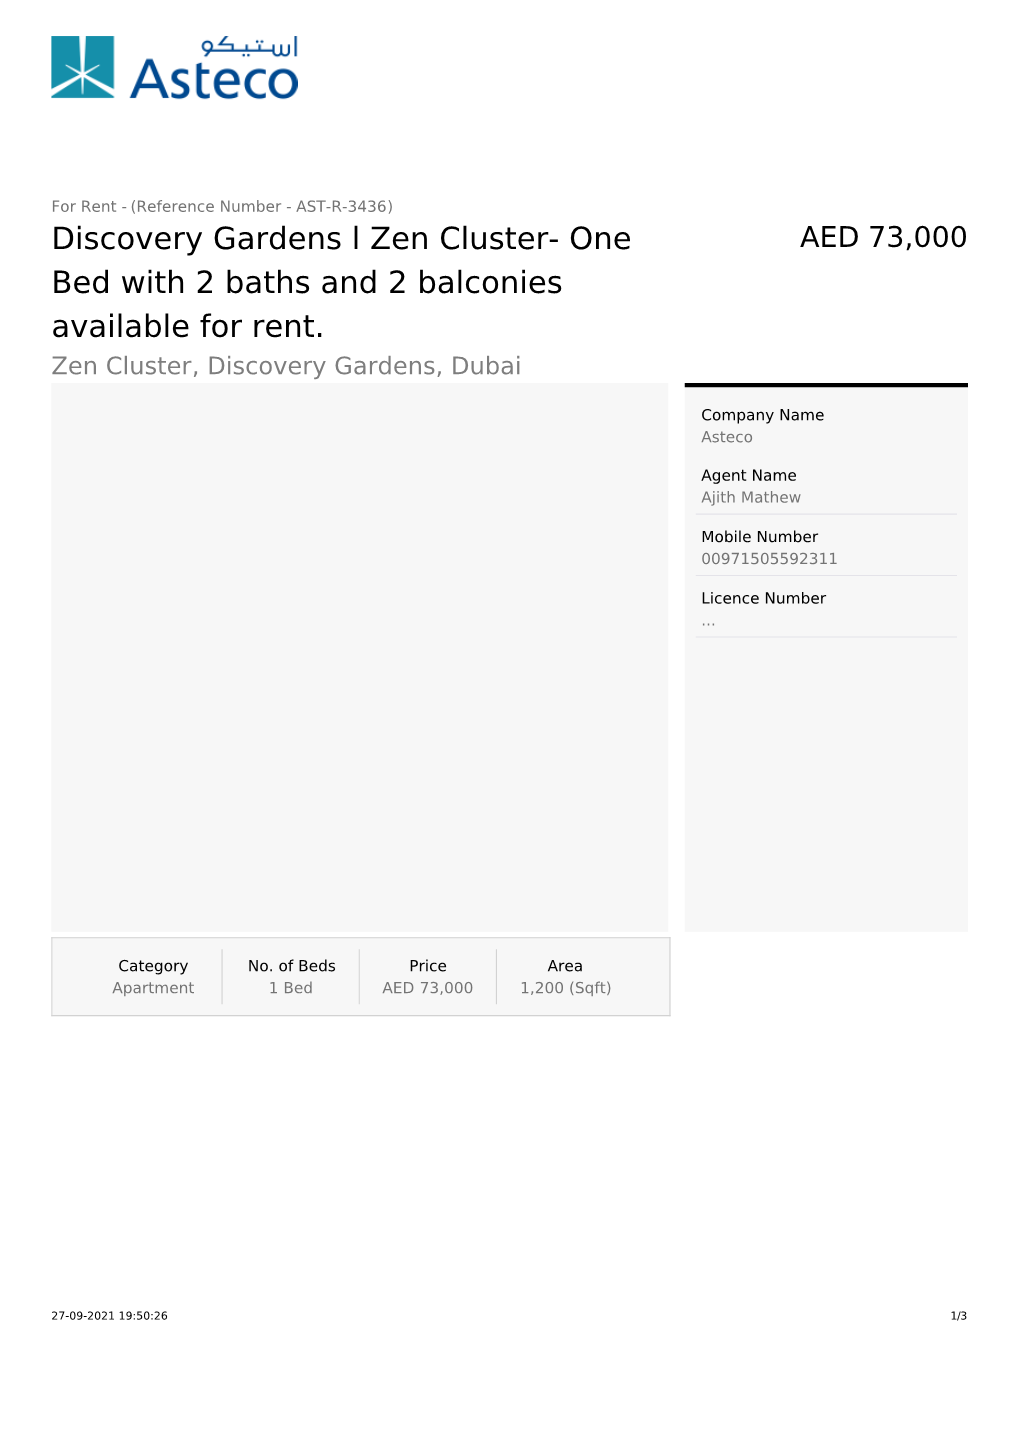 Discovery Gardens L Zen Cluster- One AED 73,000 Bed with 2 Baths and 2 Balconies Available for Rent